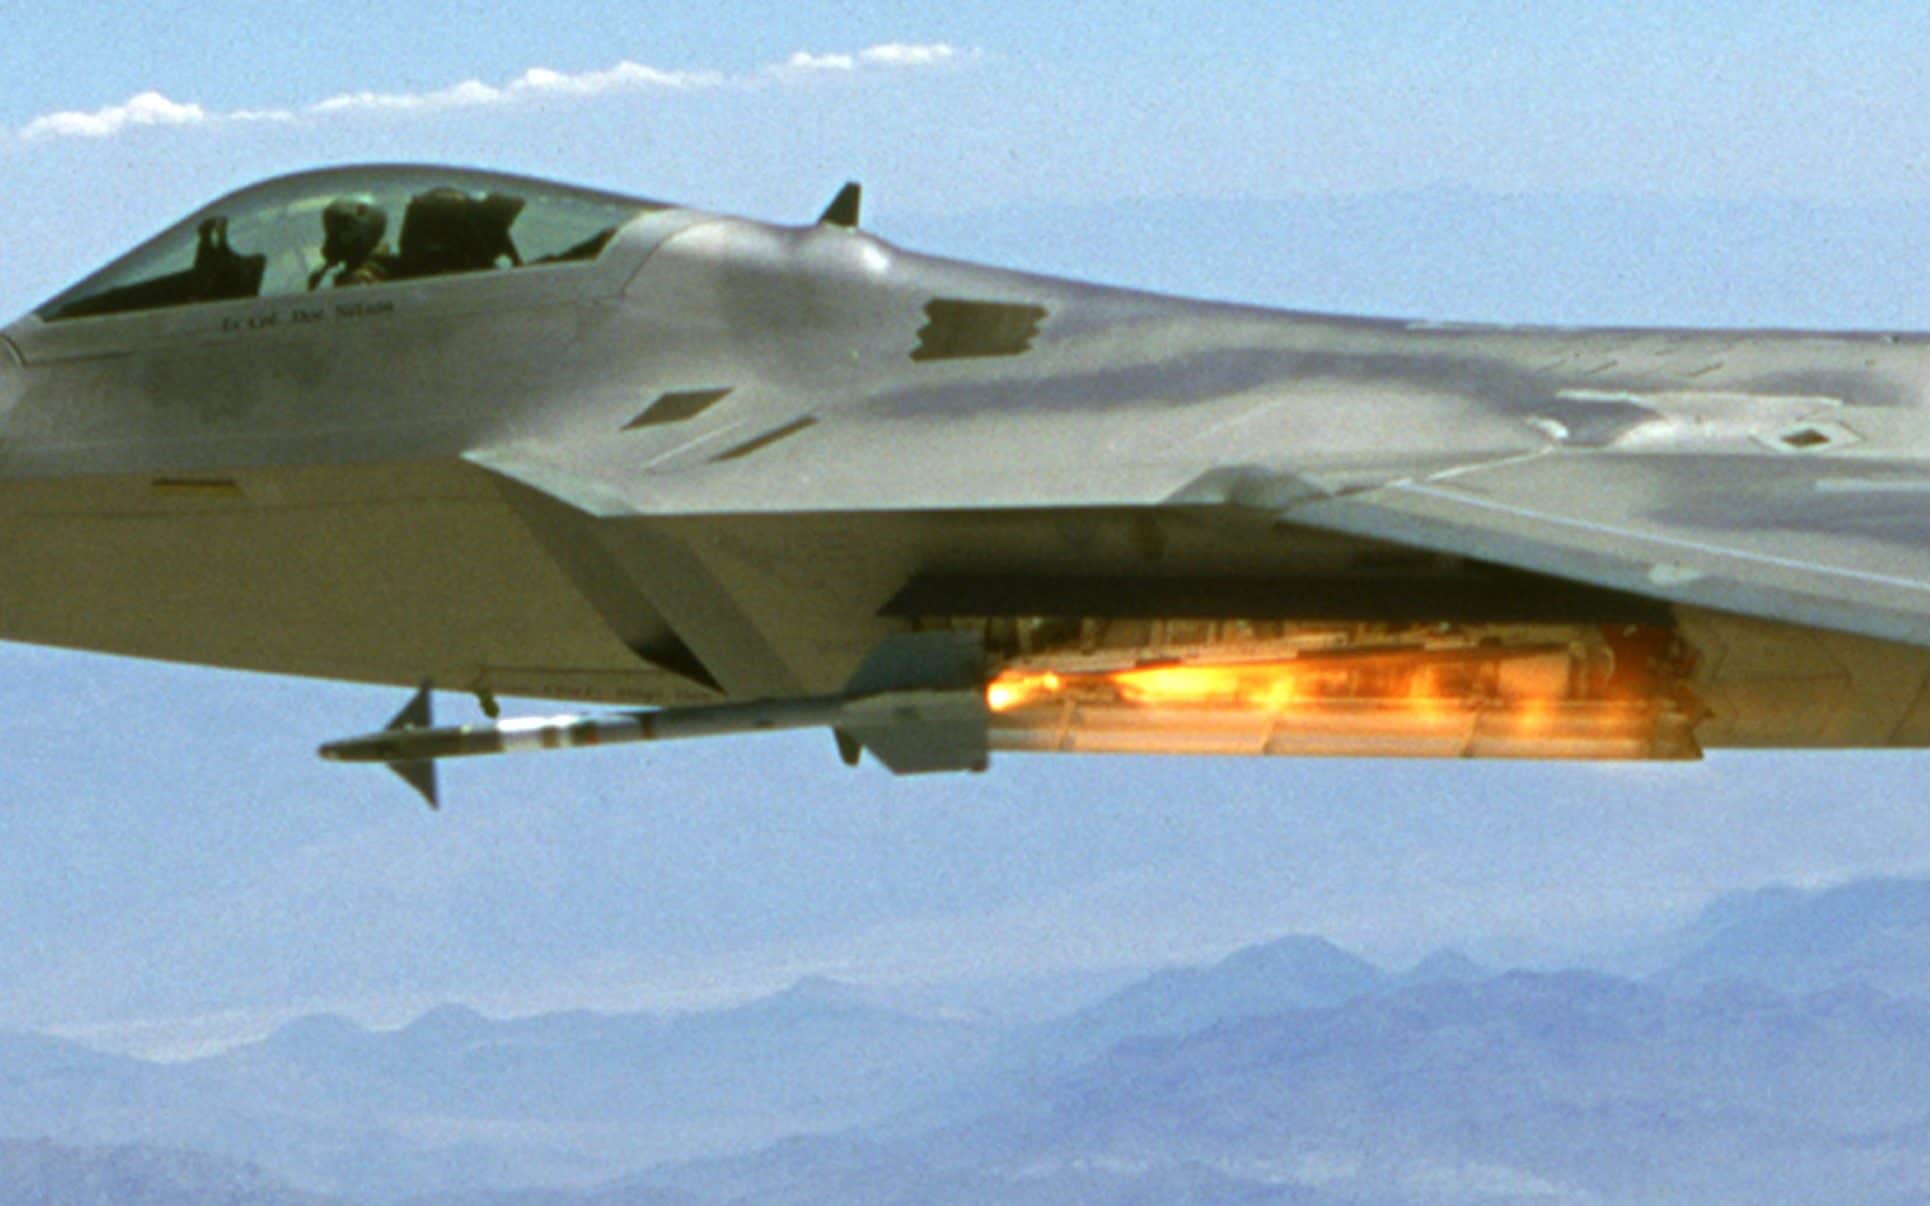 getting ready for war with china: the world’s greatest fighter jet gets an upgrade